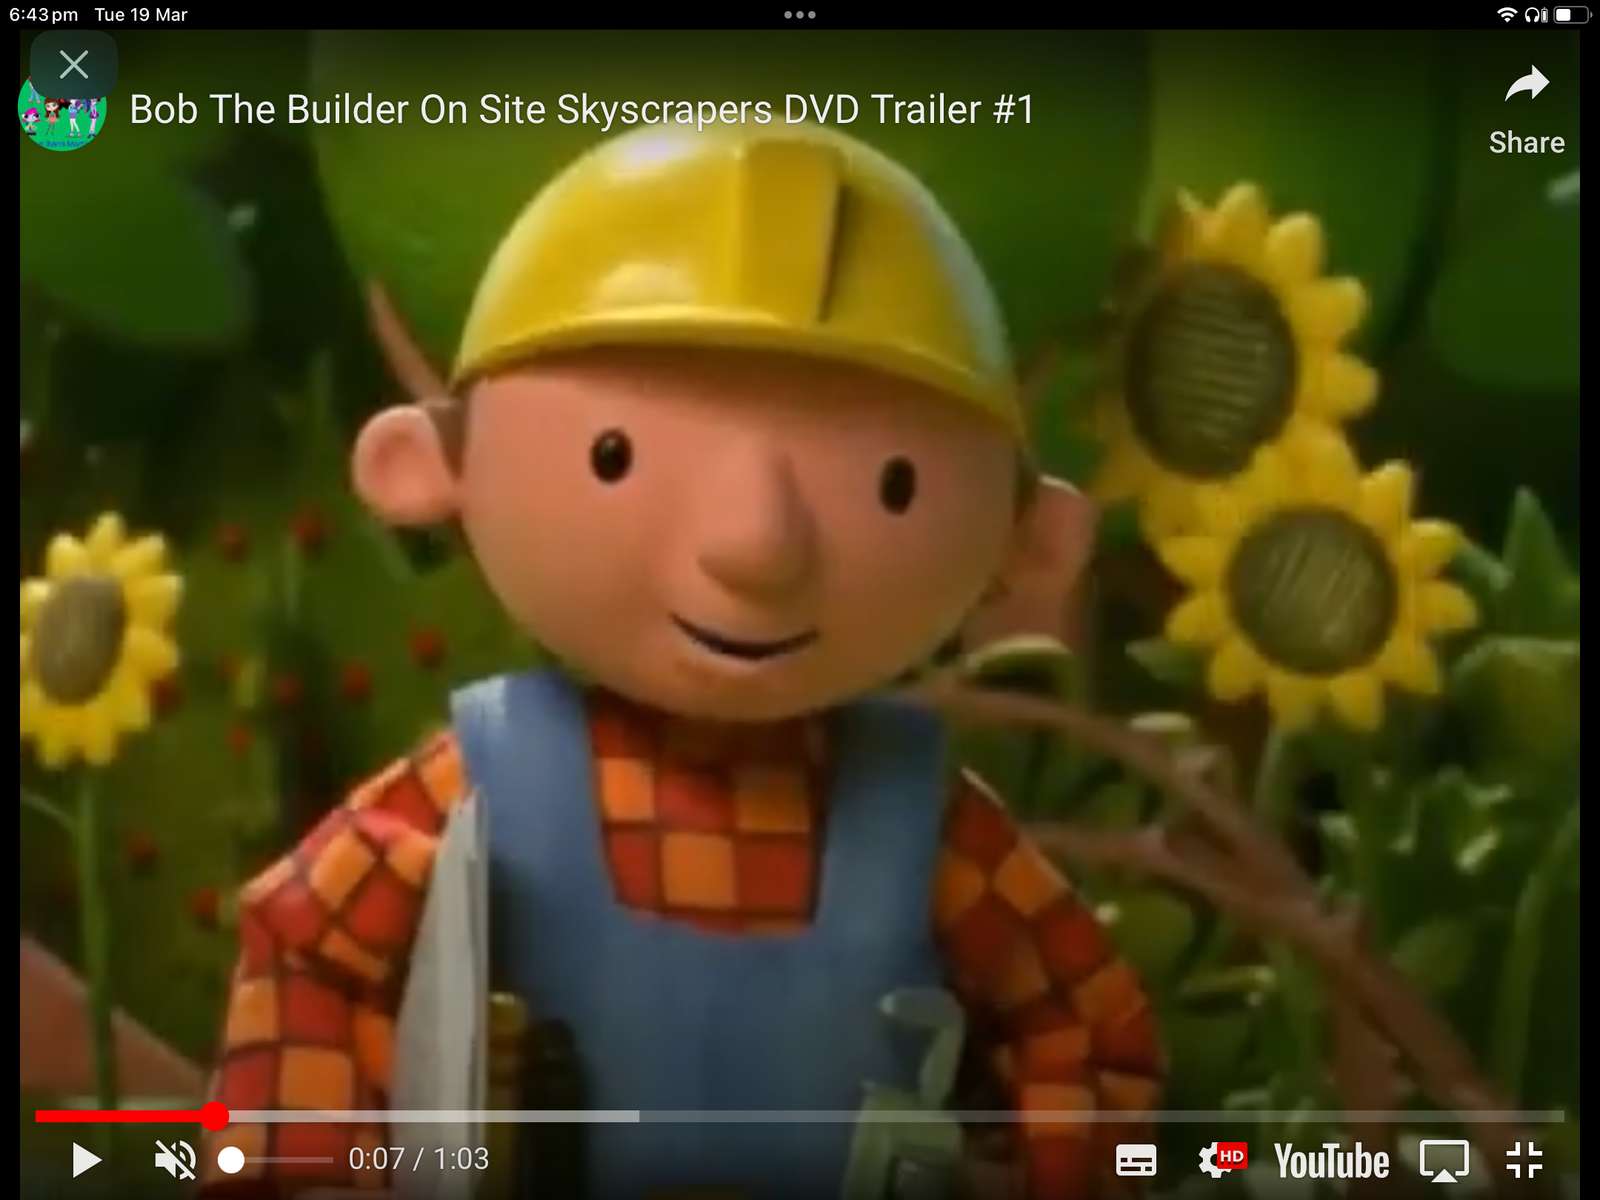 bob the builder on site skycracpers dvd trailer online puzzle